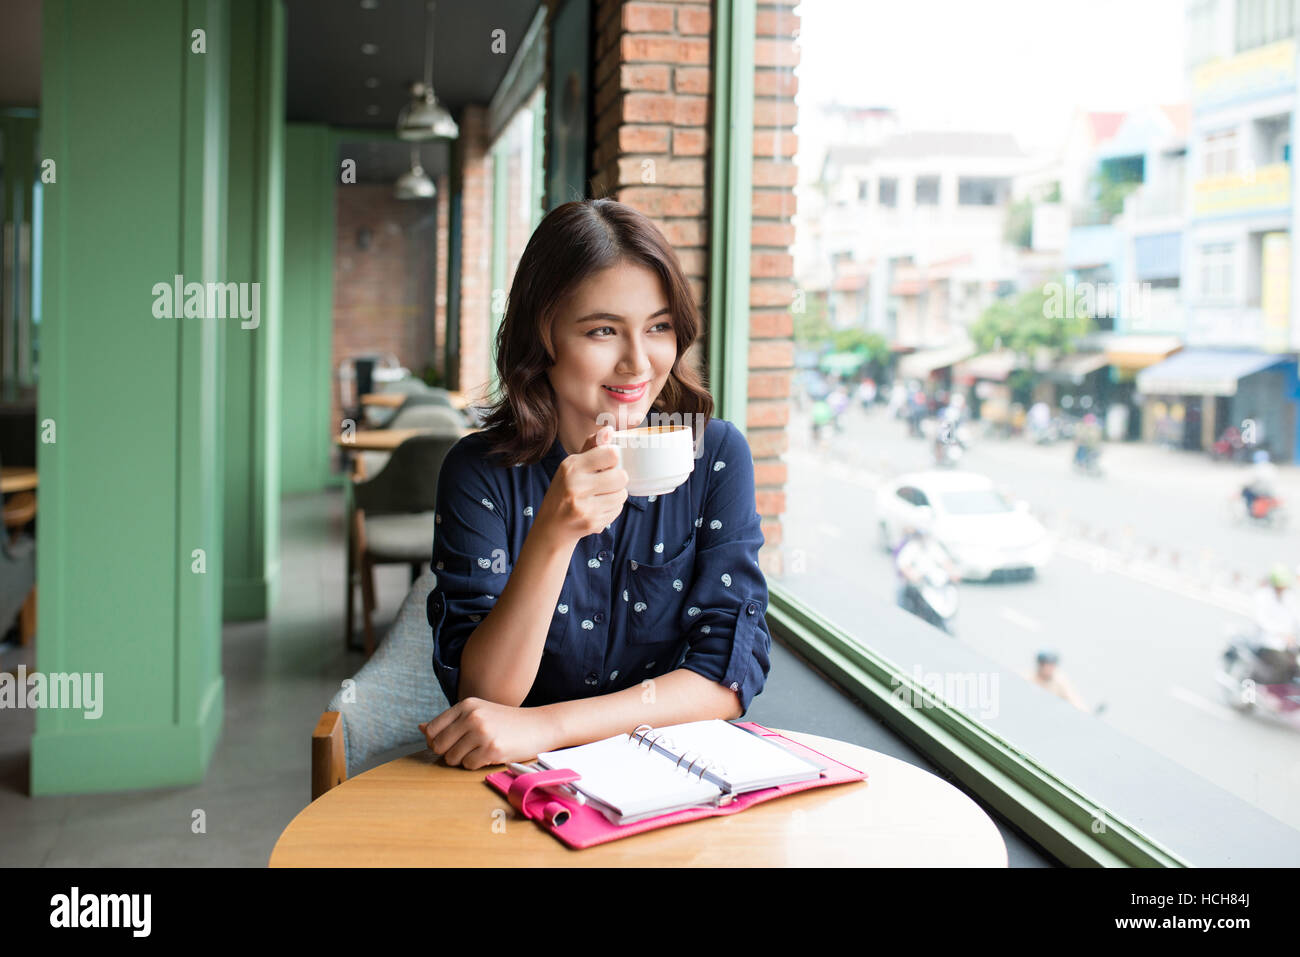 Portrait of happy young business woman with mug in hands drinking coffee in the morning at restaurant Stock Photo